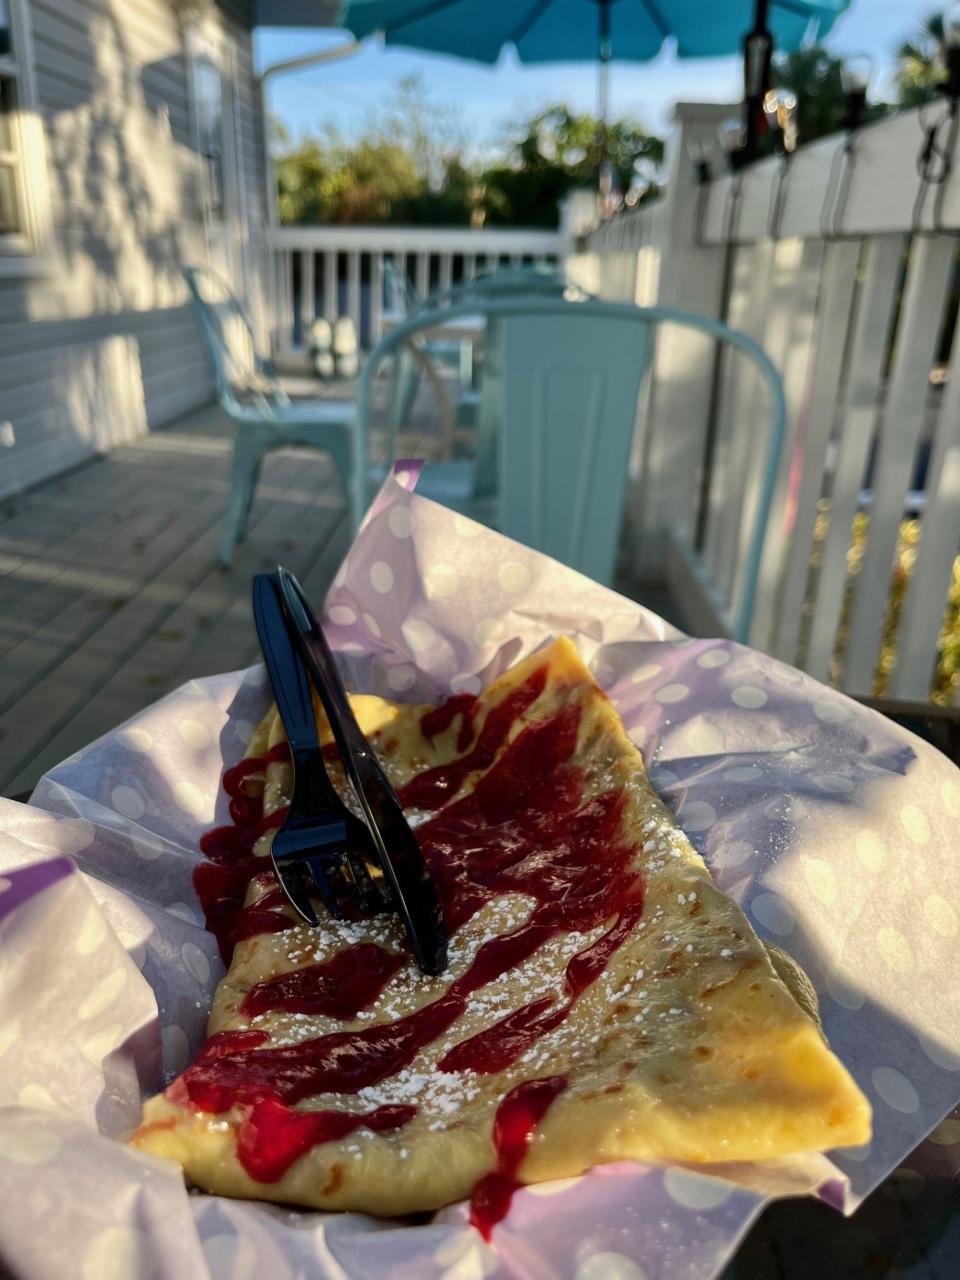 A raspberry cheesecake crepe from Spots Ice Cream, Crepes & Sauces on Pine Island.